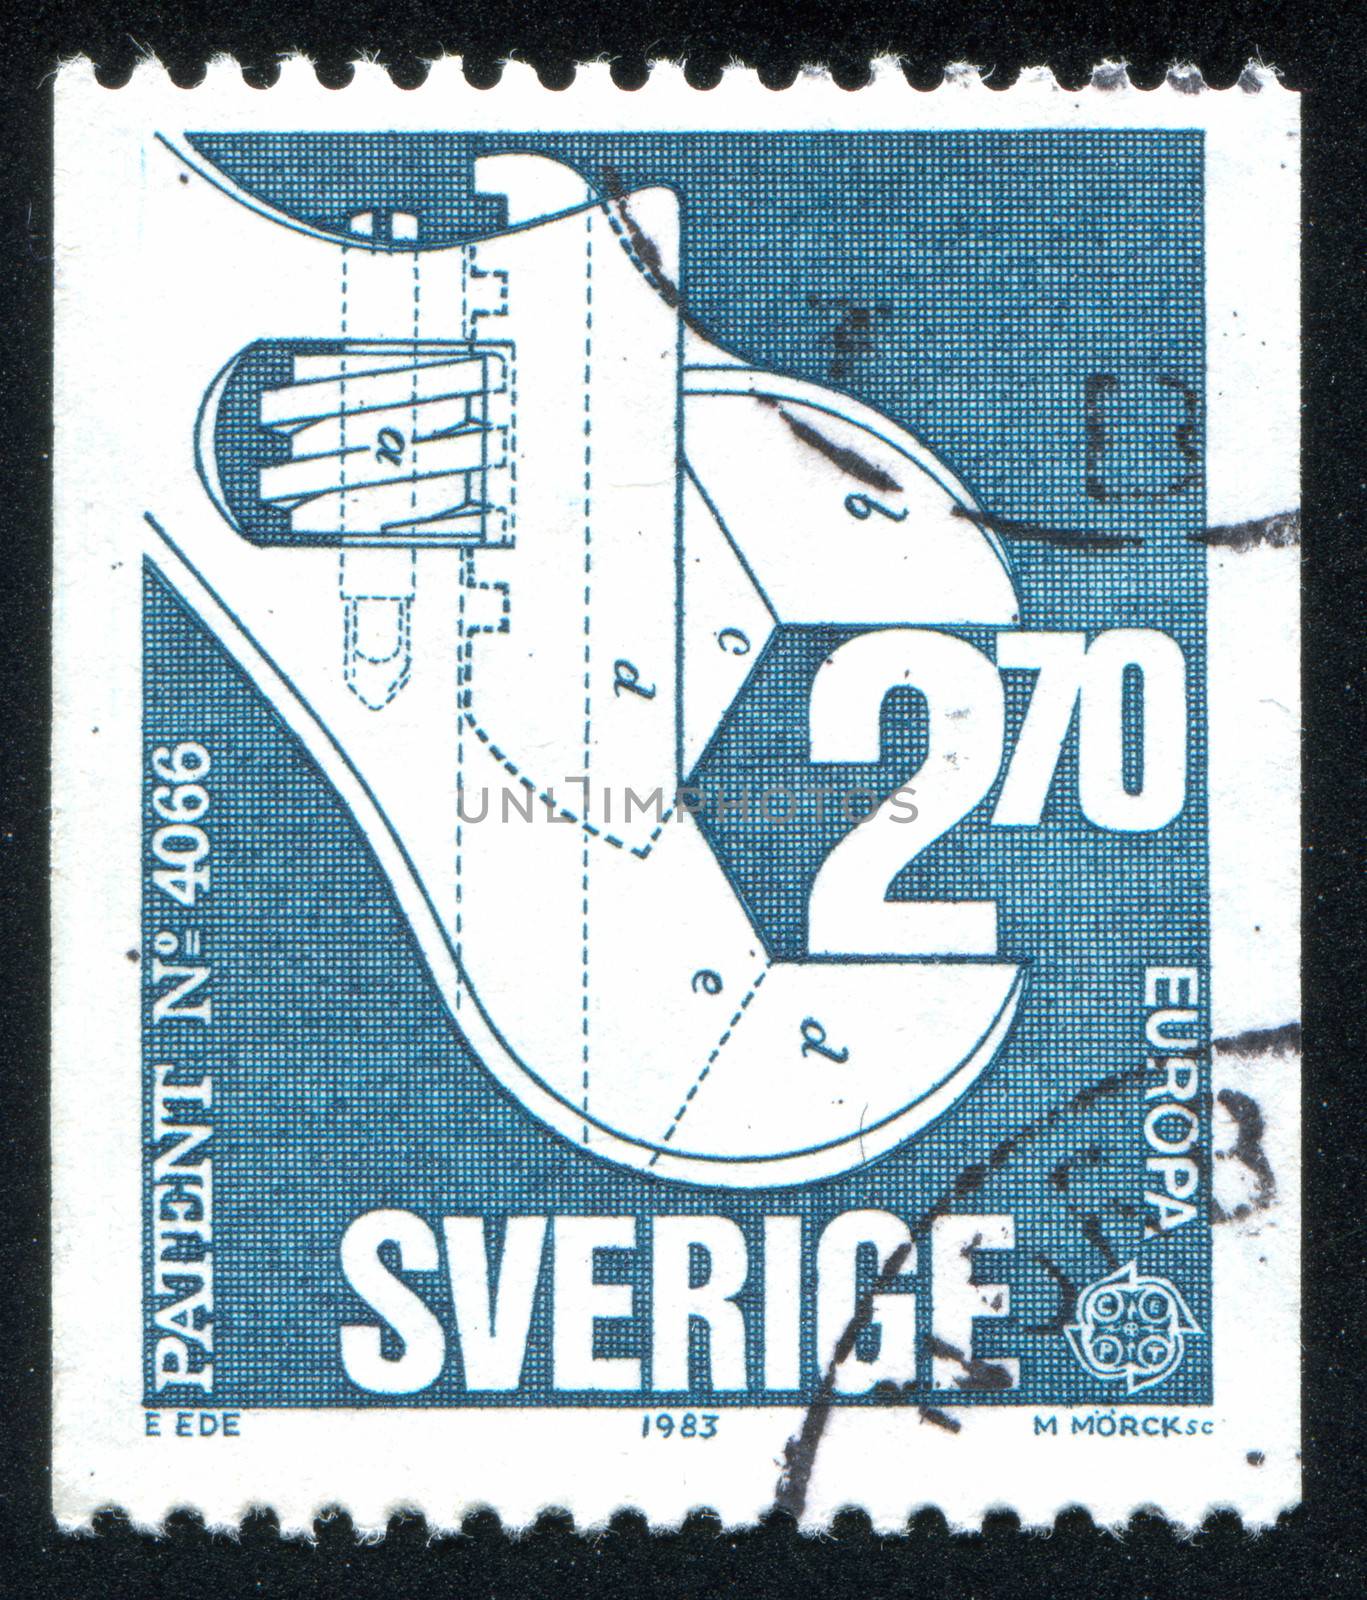 SWEDEN - CIRCA 1983: stamp printed by Sweden, shows Sliding-jaw wrench, circa 1983